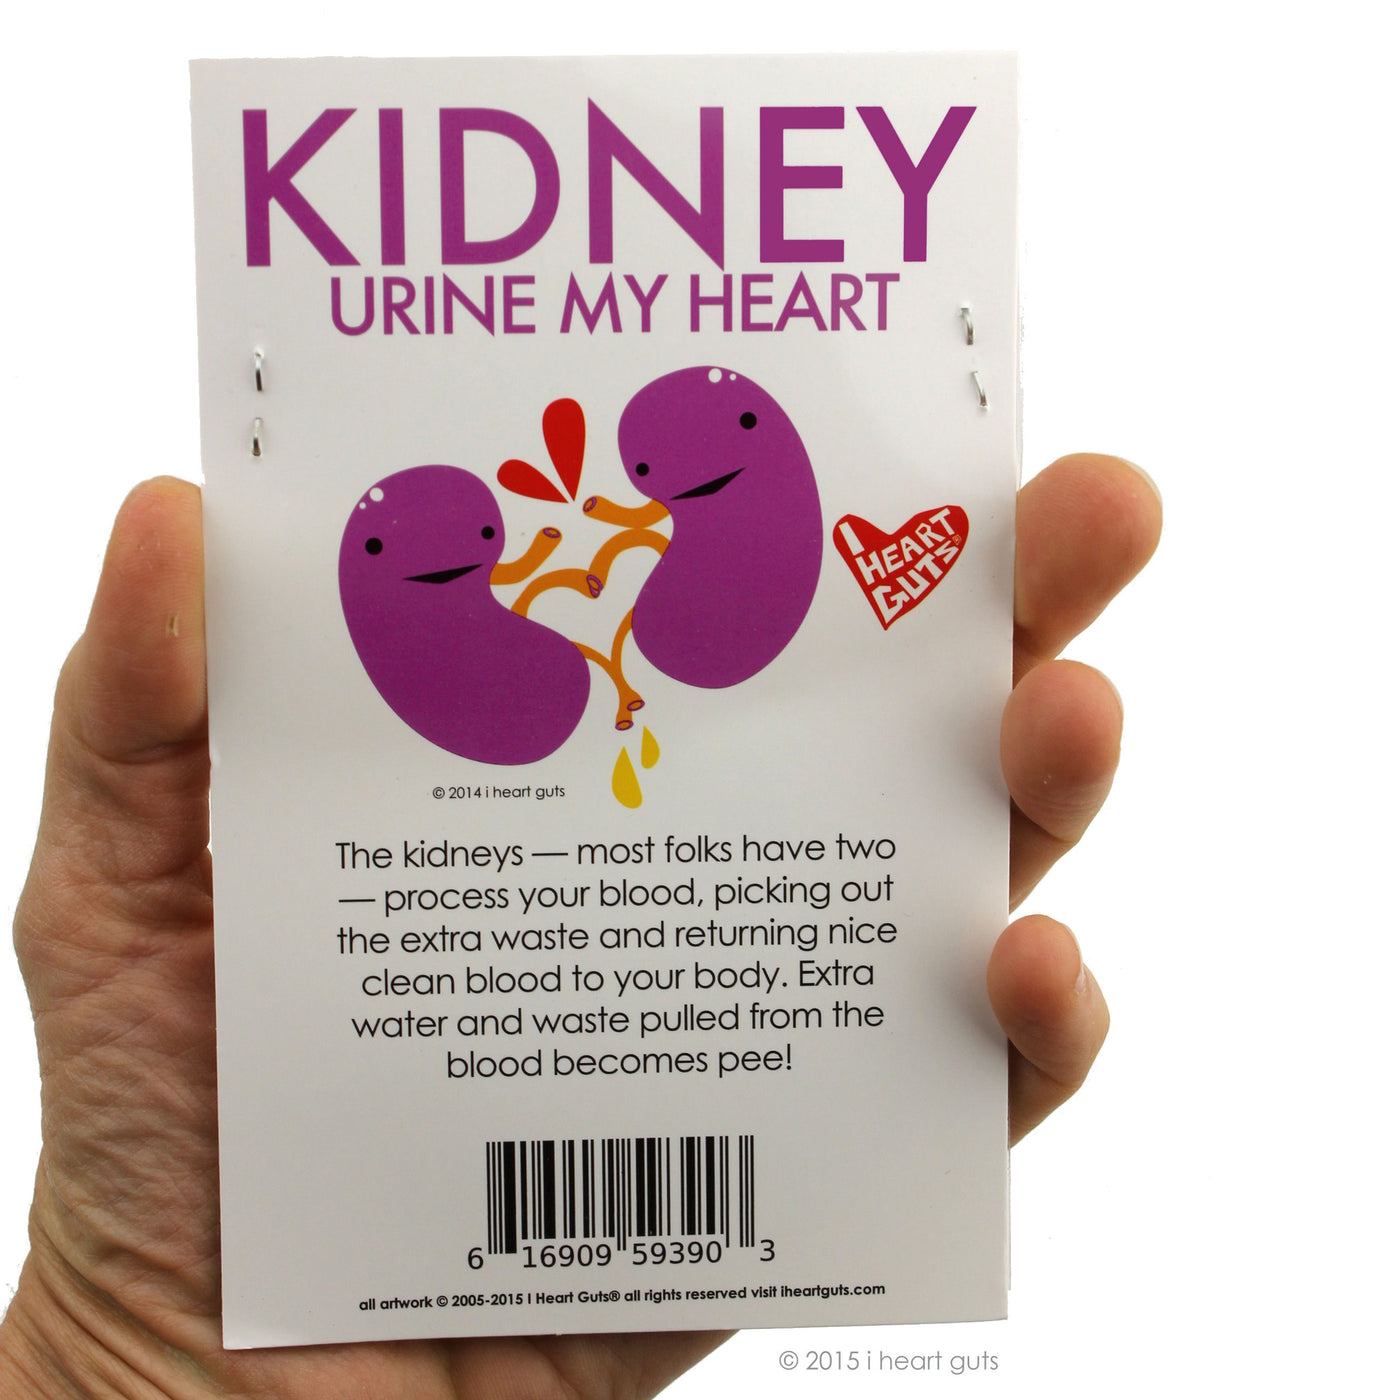 Kidney Stickers | Cute Funny Kidney Donor and Transplant Sticker Set